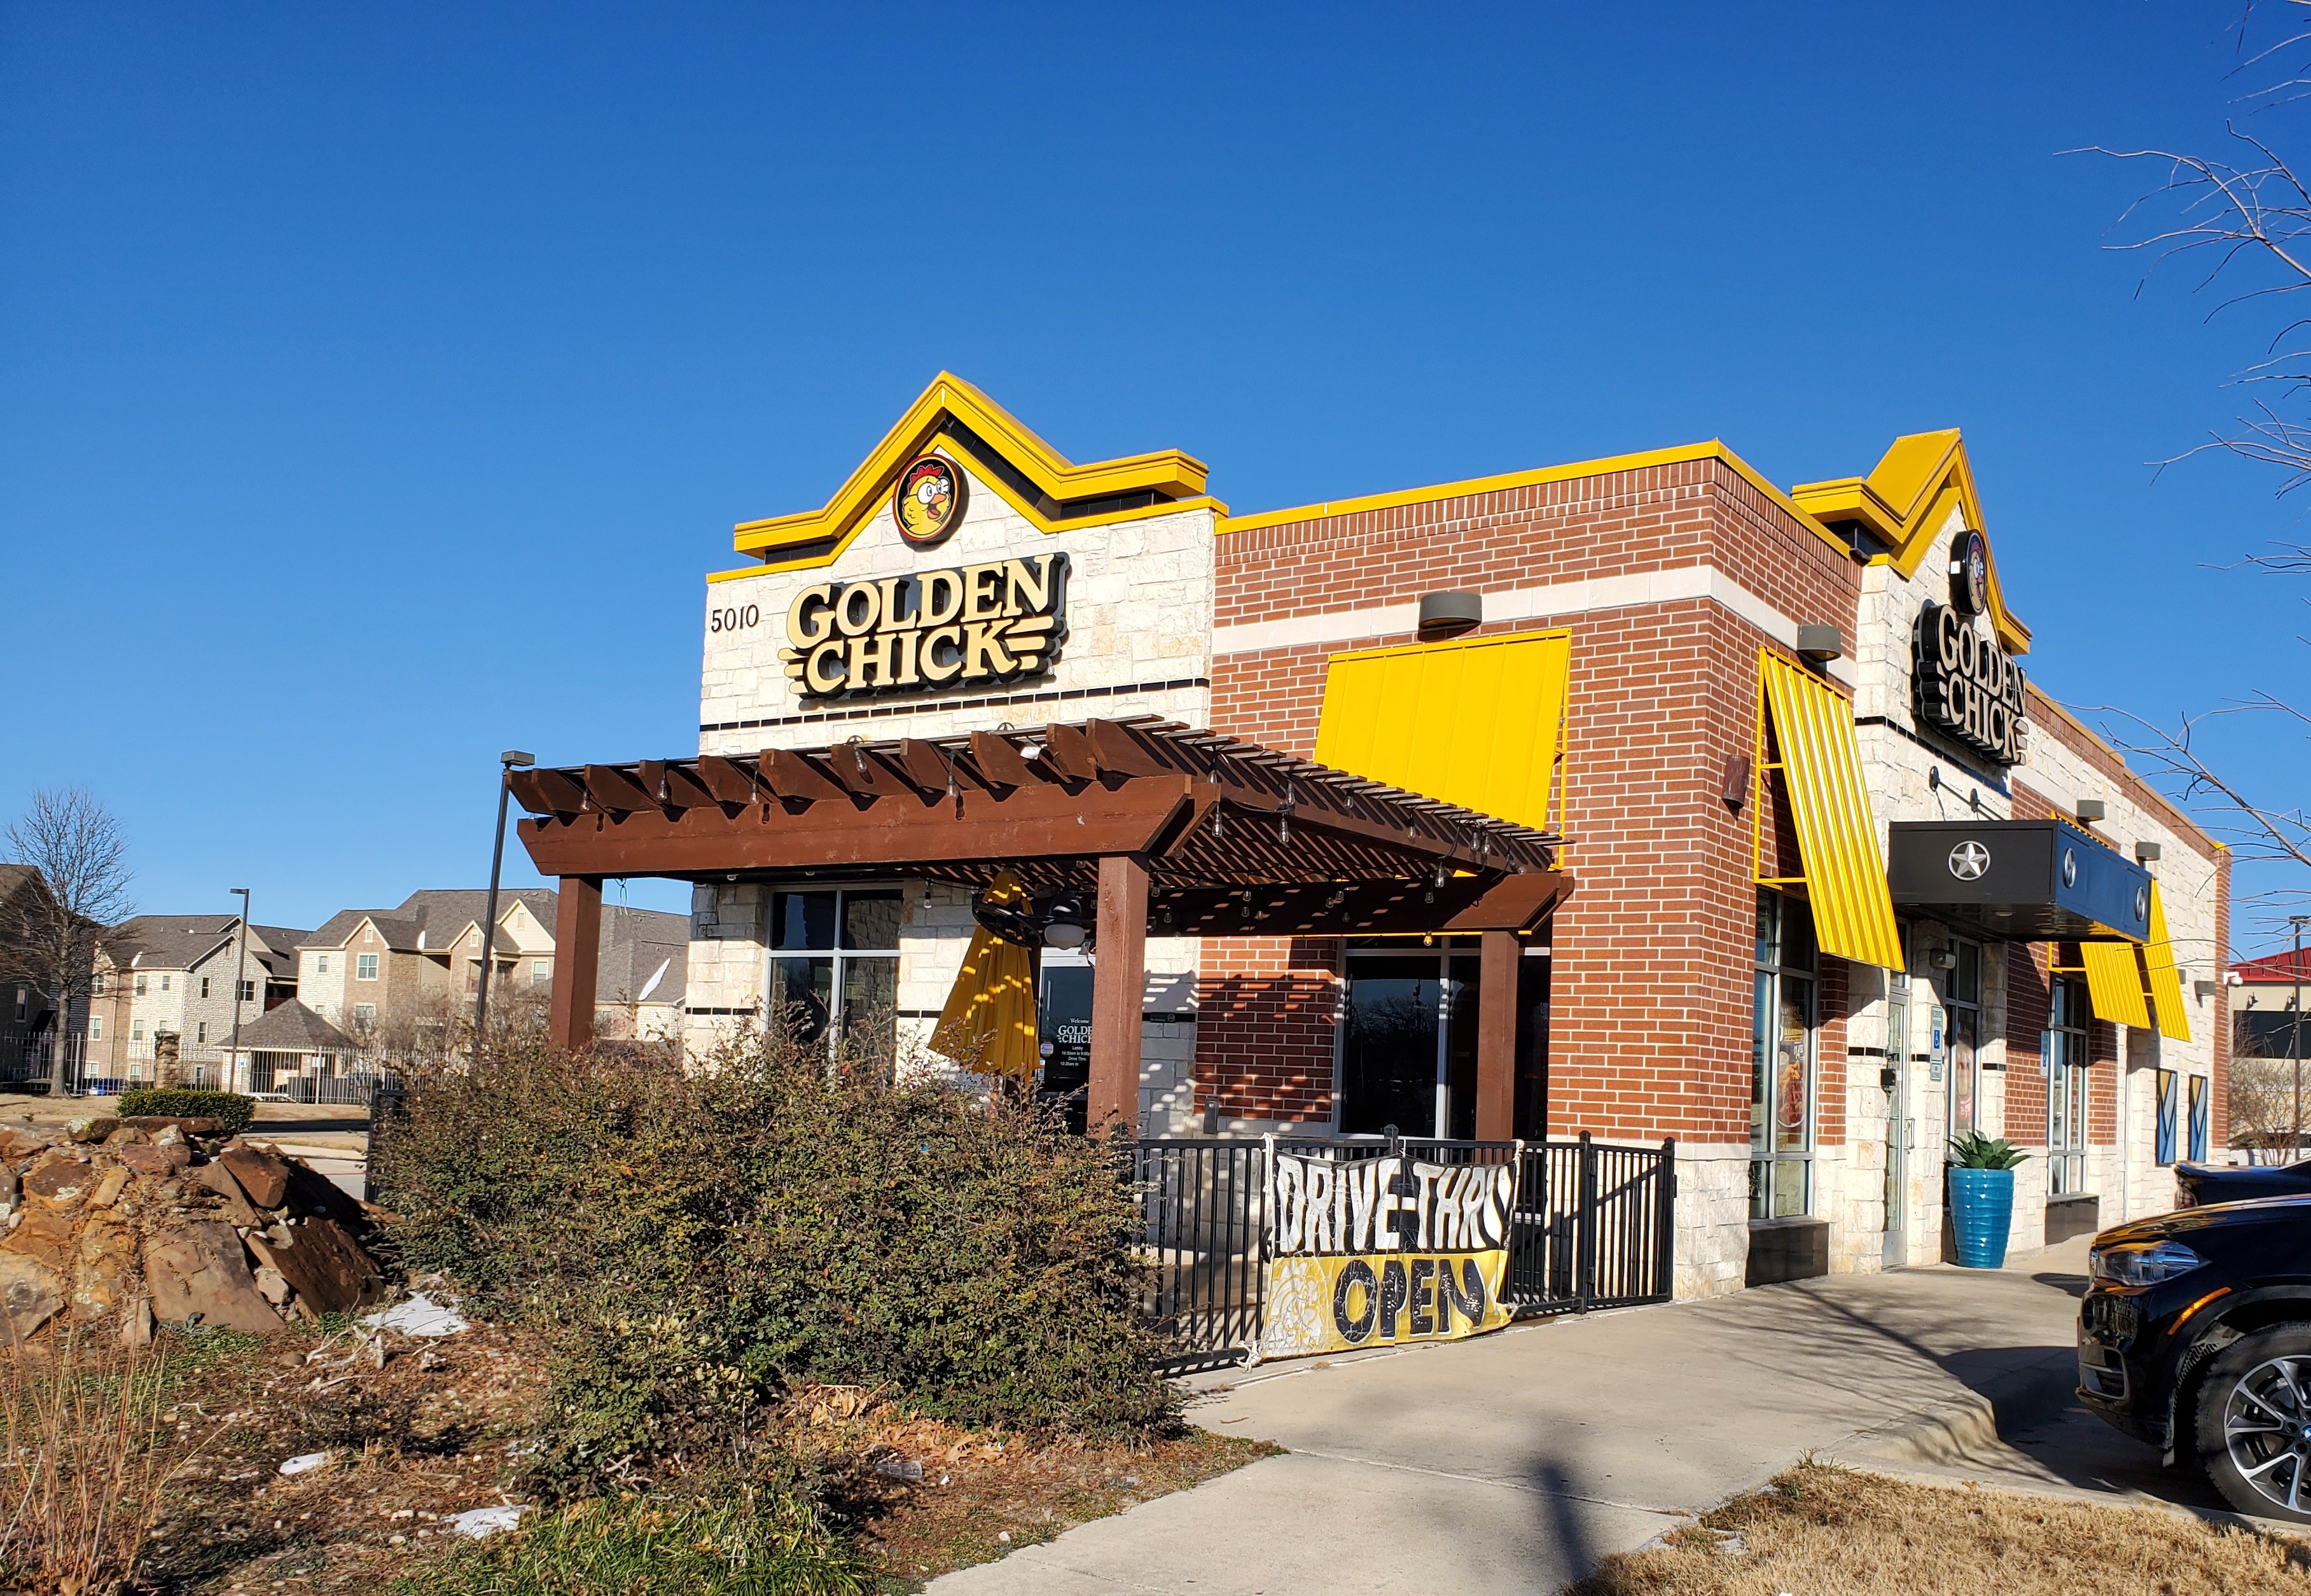 Golden Chick storefront.  Your local Golden Chick fast food restaurant in Grand Prairie, Texas